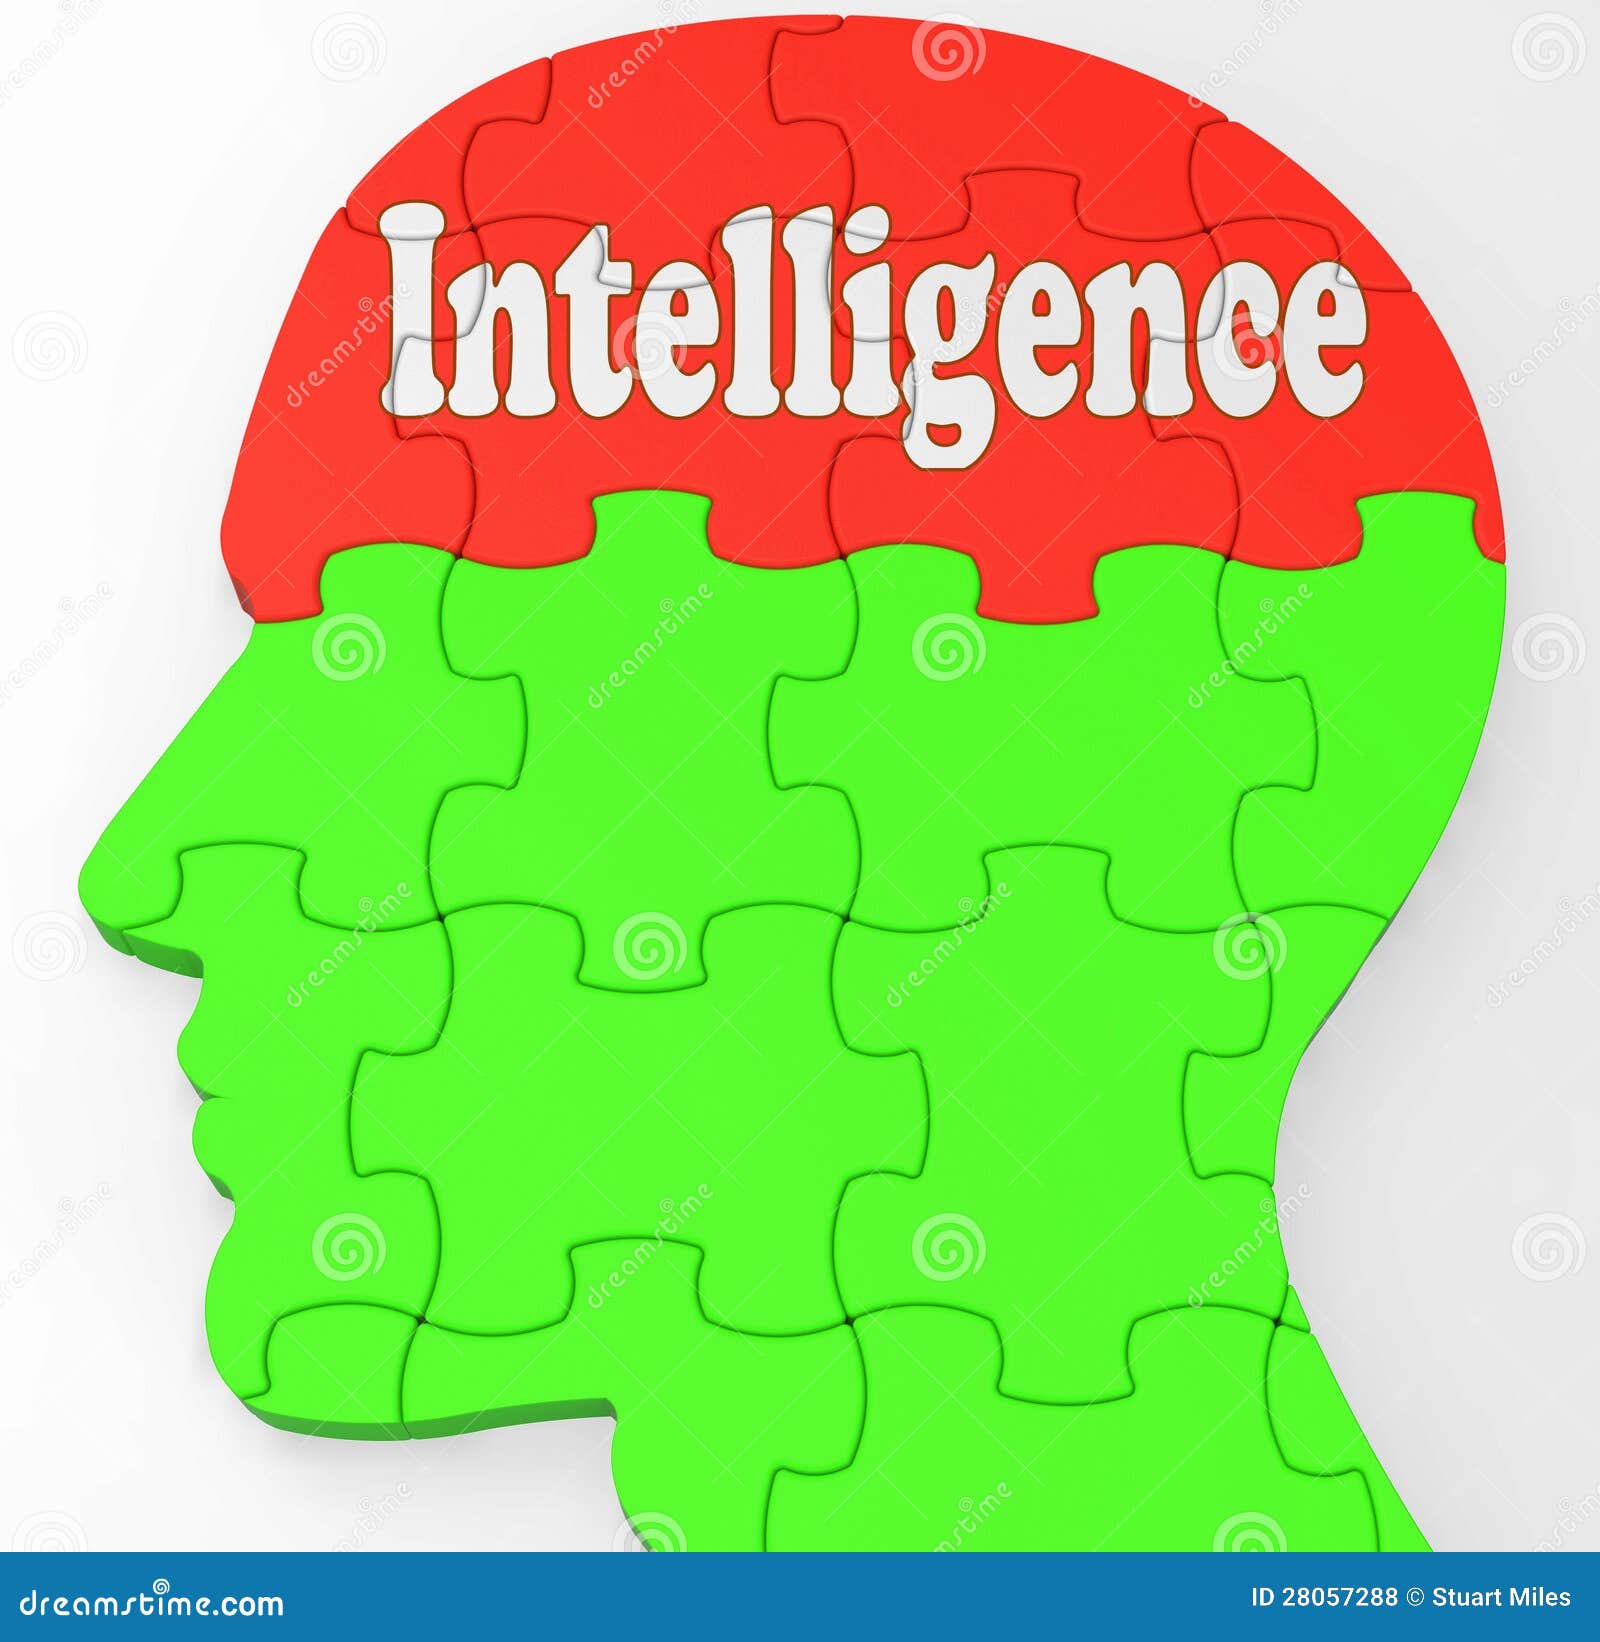 business intelligence clipart - photo #4